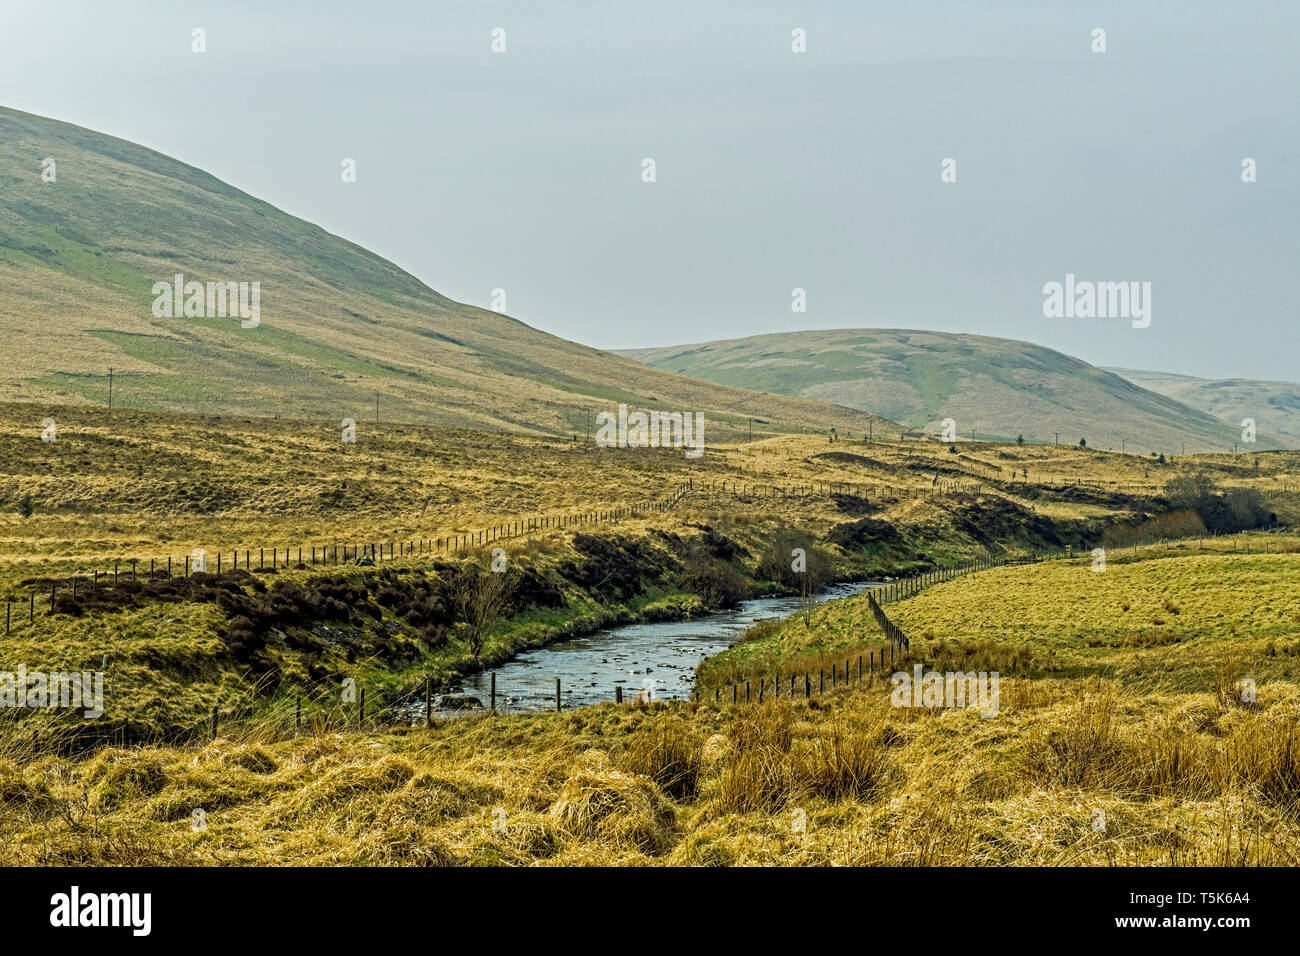 The source of the River Tweed high in the Tweedsmuir Hills in the southern region of Scotland. The hills here appear remote and bleak with landscapes. Stock Photo